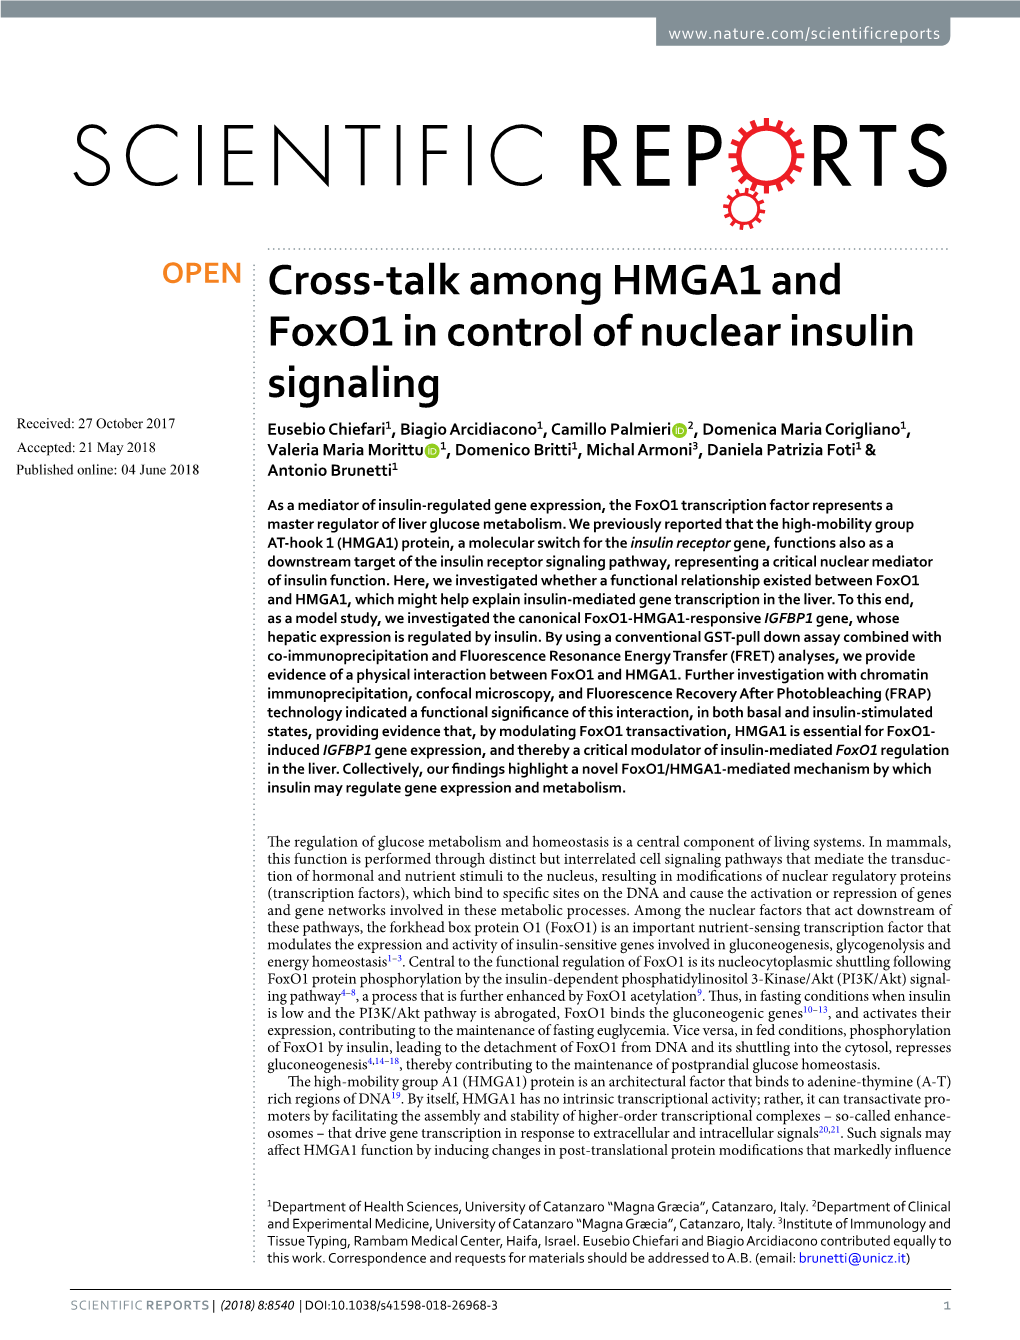 Cross-Talk Among HMGA1 and Foxo1 in Control of Nuclear Insulin Signaling